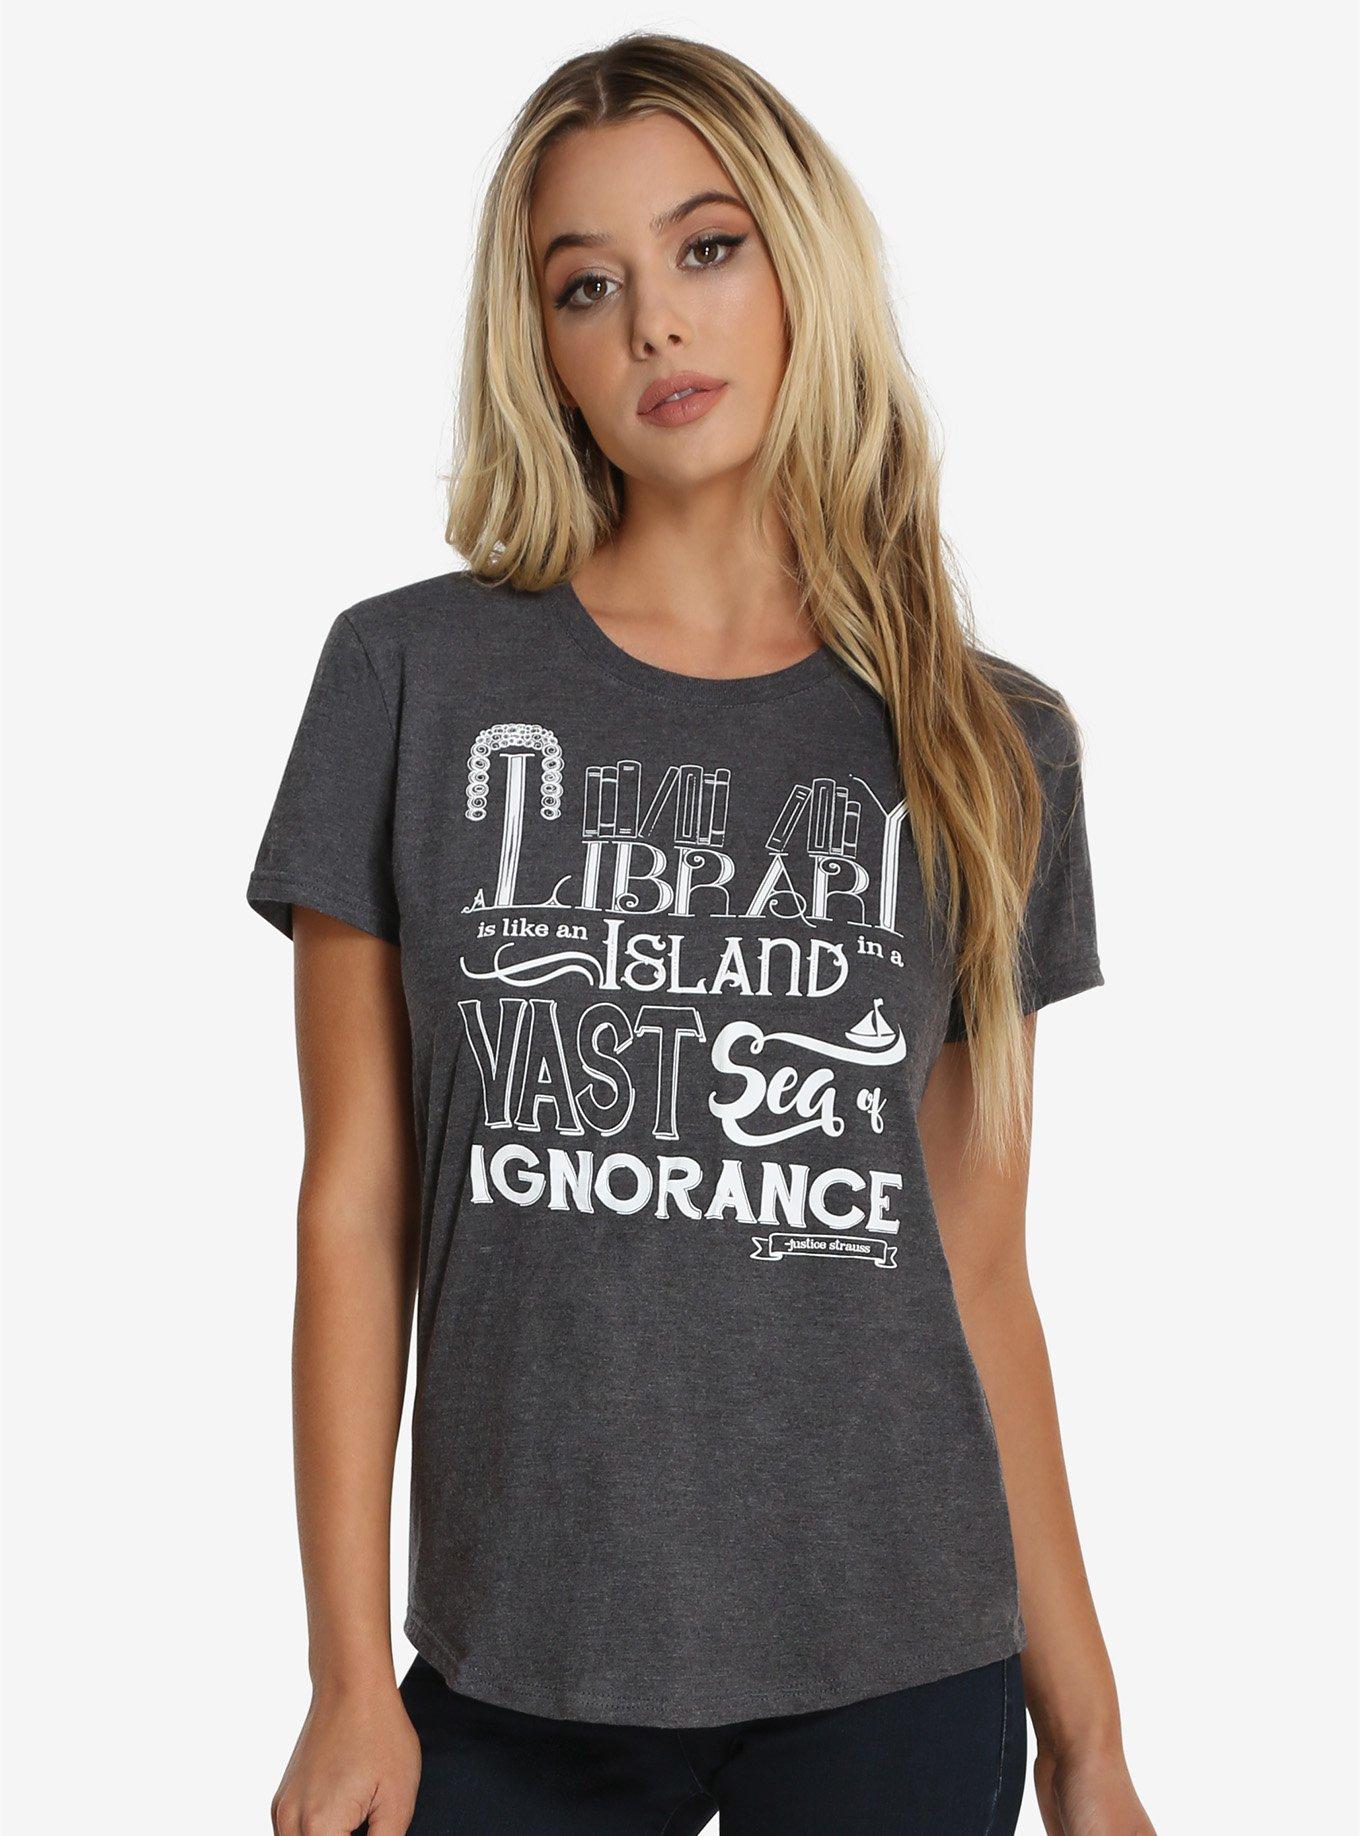 A Series Of Unfortunate Events Library Womens Tee - BoxLunch Exclusive, GREY, hi-res